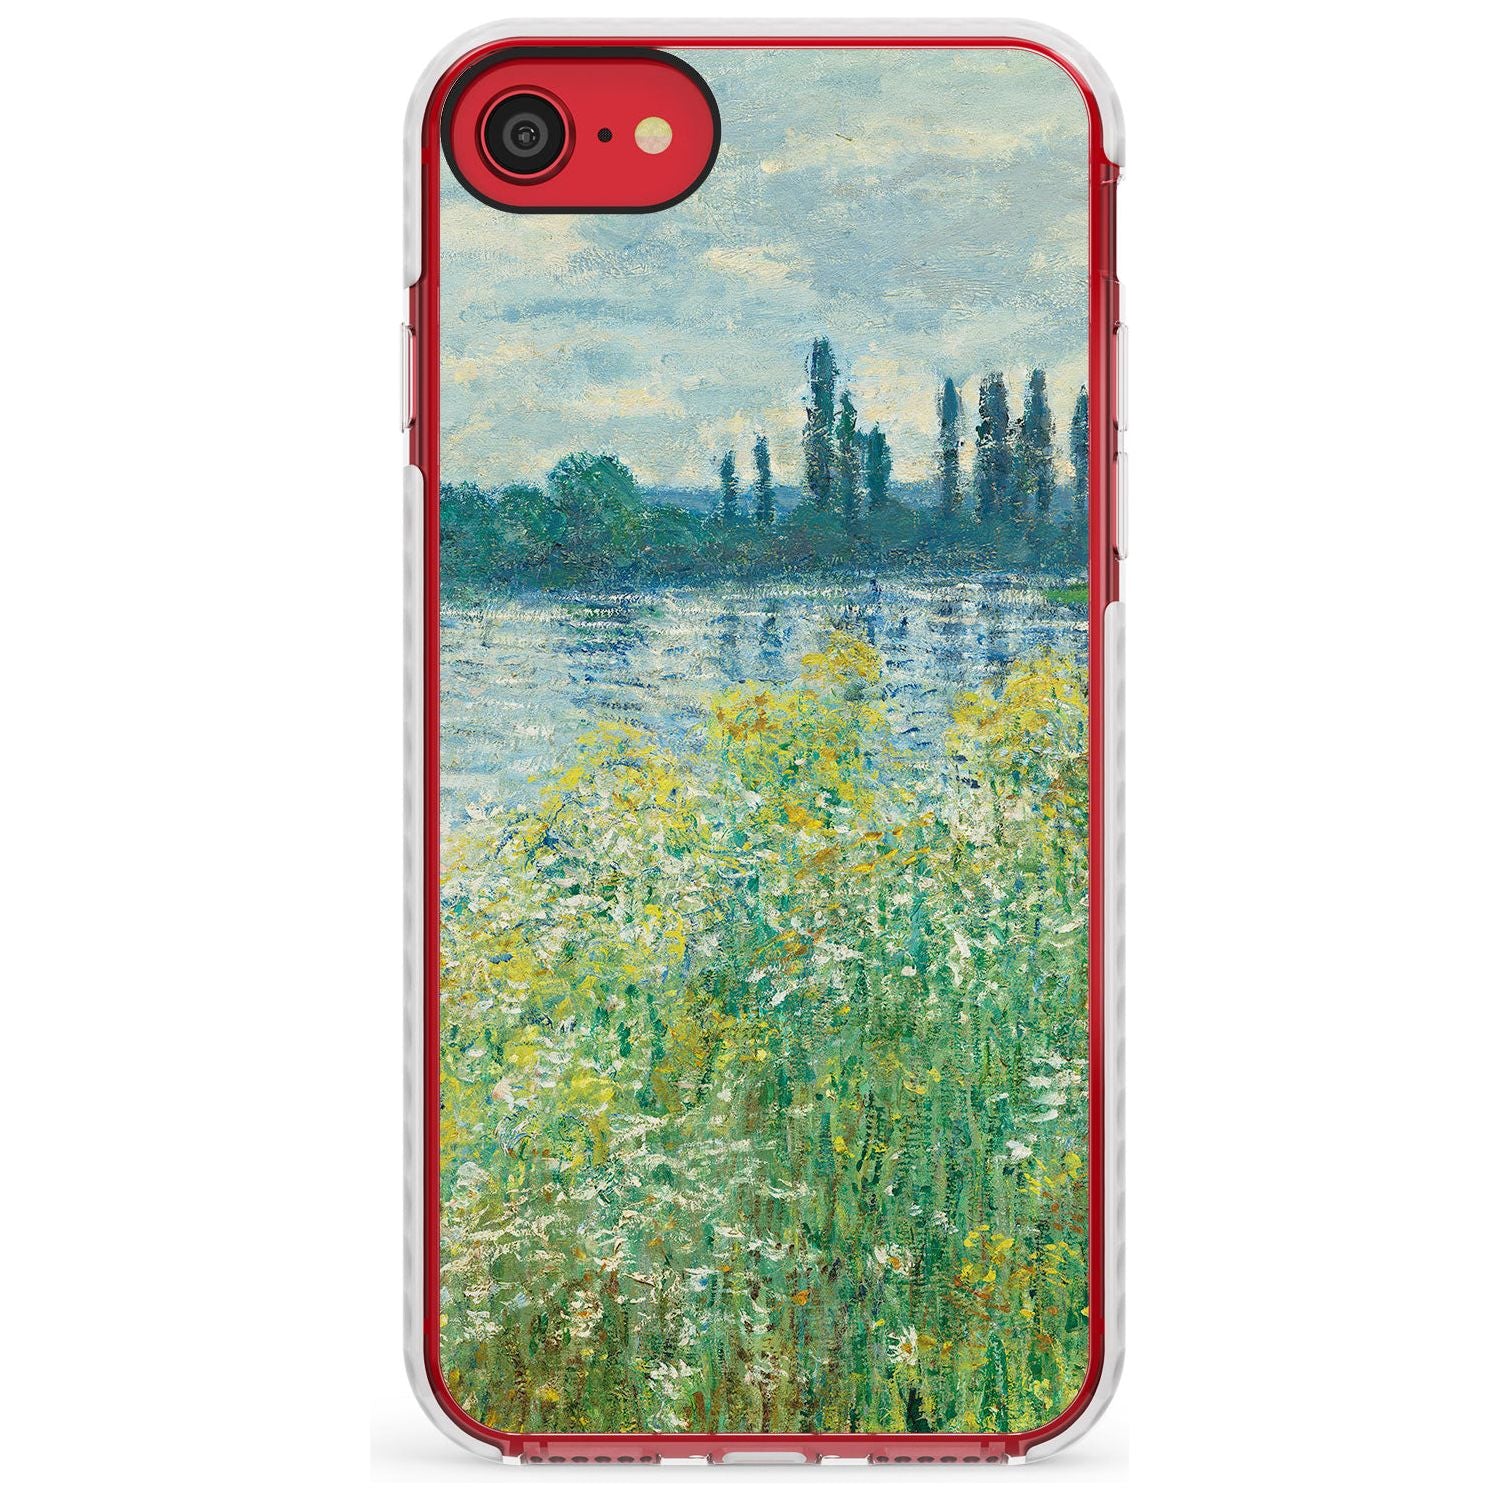 Banks of the Seine by Claude Monet Slim TPU Phone Case for iPhone SE 8 7 Plus